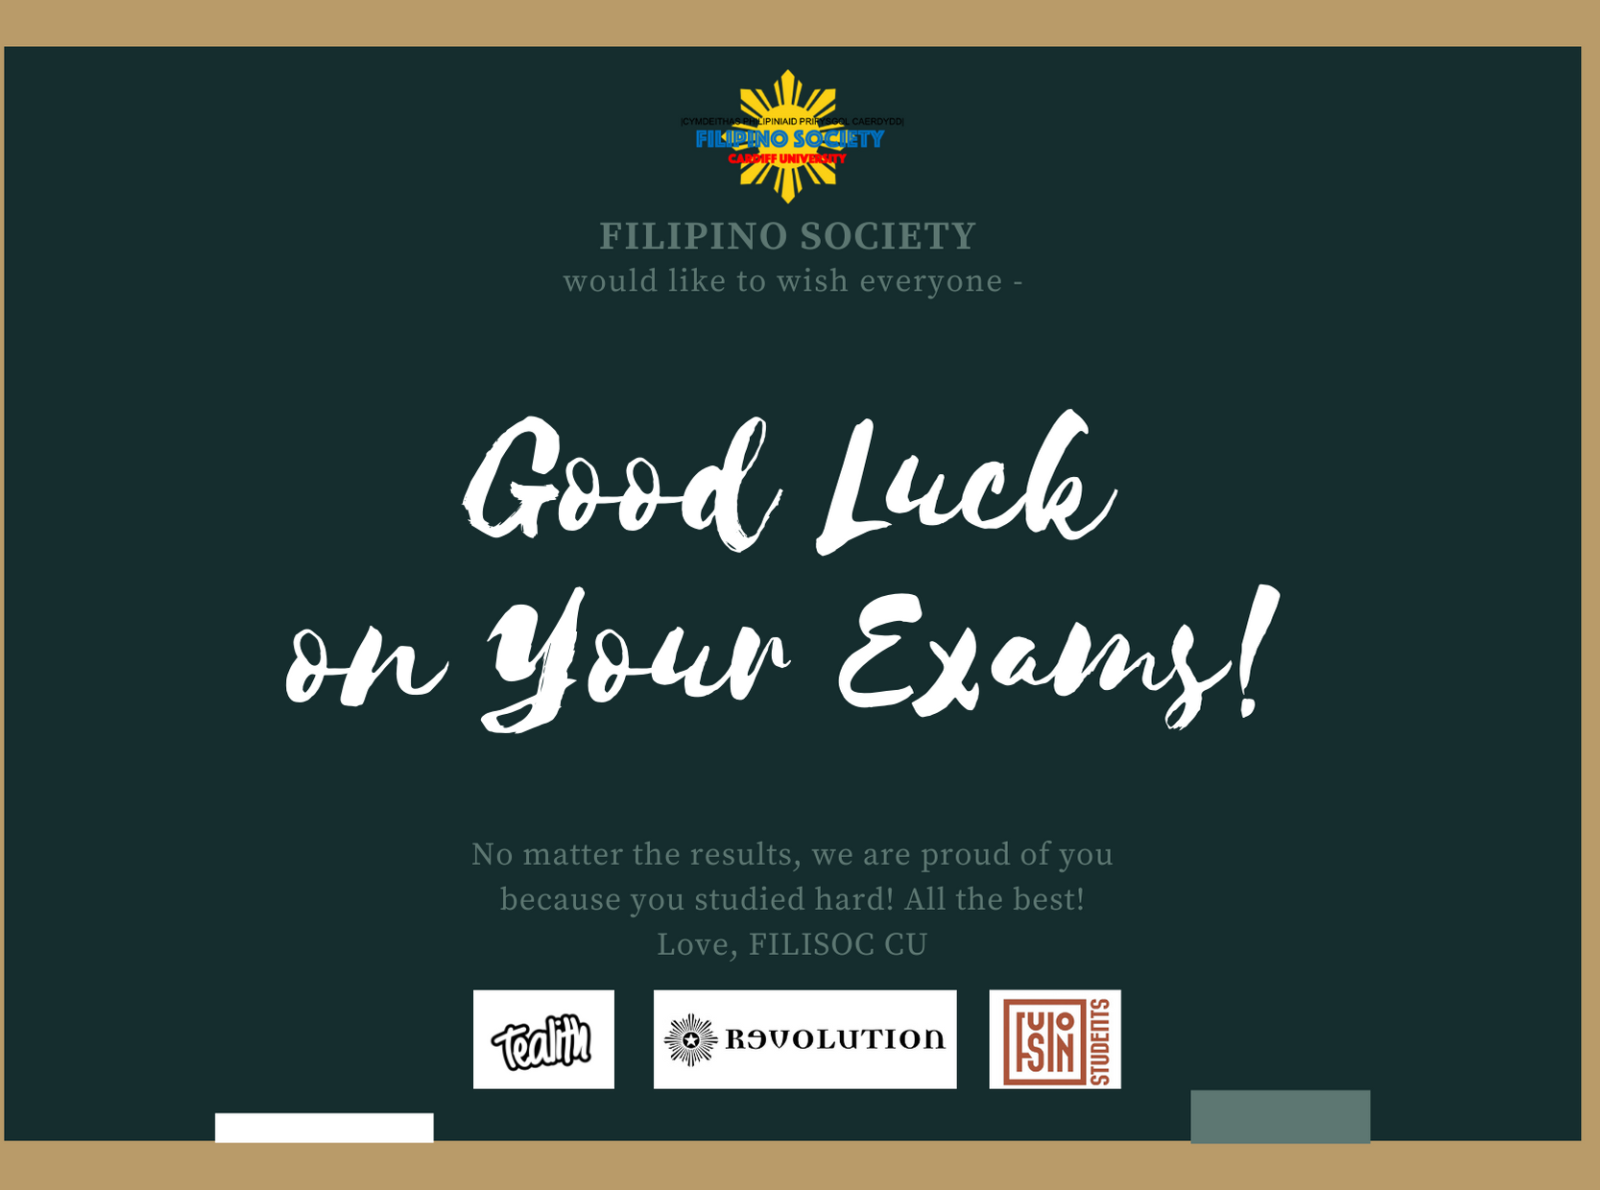 Filipino Society Good Luck Exam Poster by Vince Mojares on Dribbble